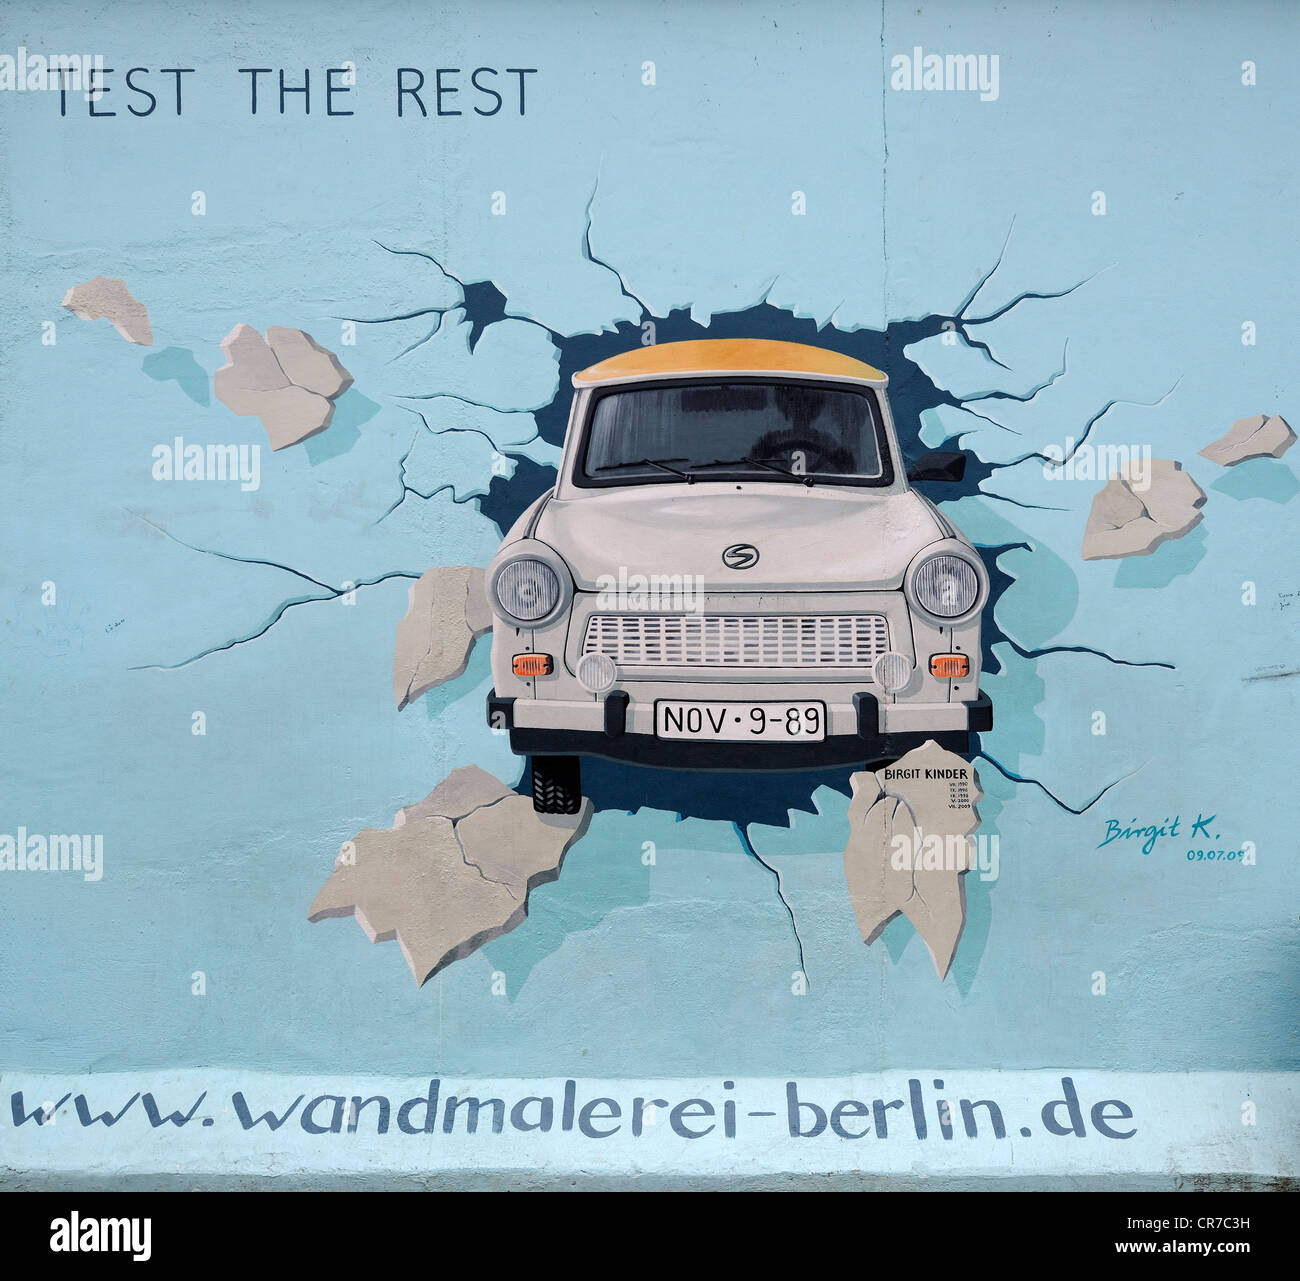 Test the Rest, Trabant breaking through the Berlin Wall, by Birgit Kinder, painting on the Berlin Wall, East Side Gallery Stock Photo